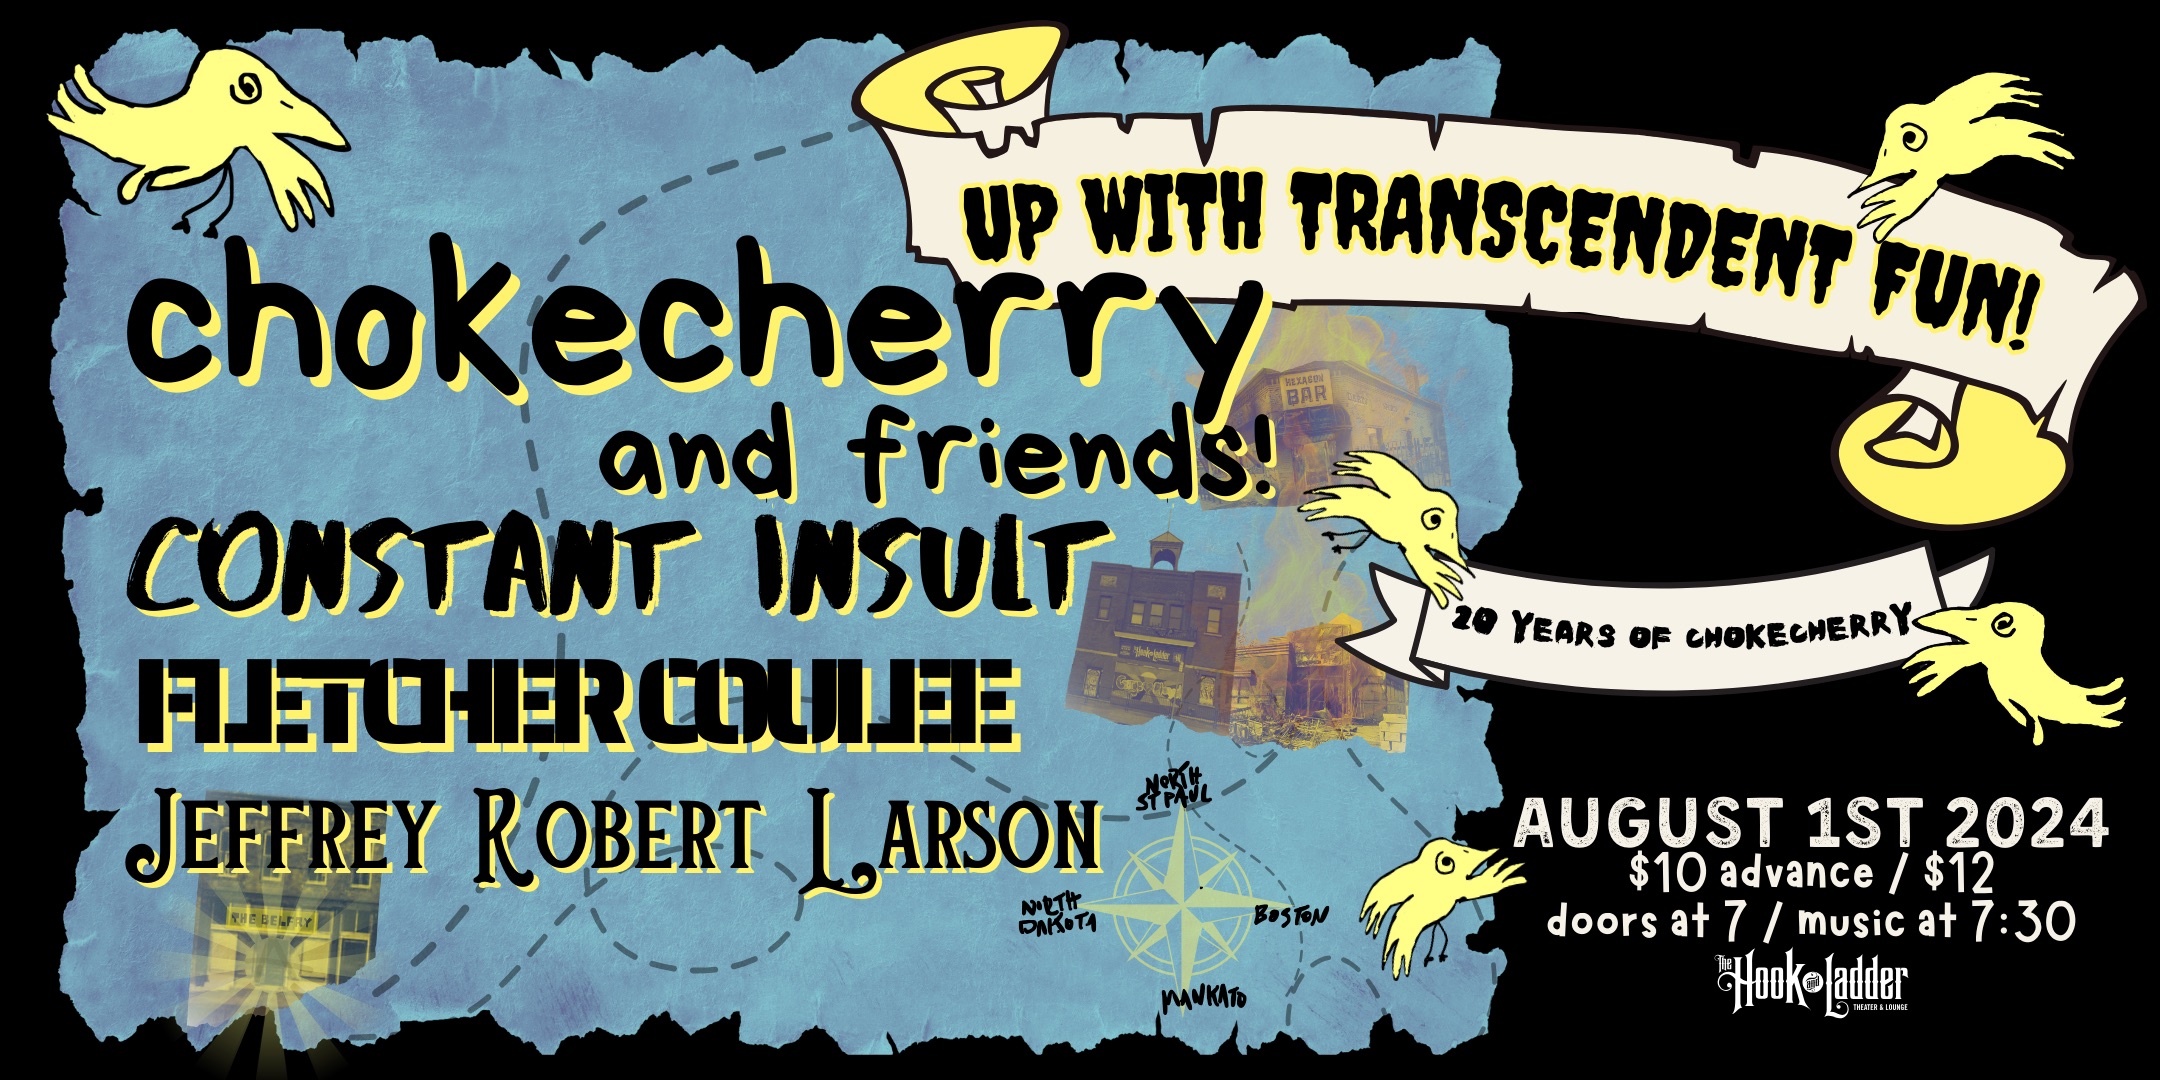 Up With Transcendent Fun: 20 Years of Chokecherry! with special guests Constant Insult, Fletcher Coulee, & Jeffrey Robert Larson Thursday, August 1 The Hook and Ladder Theater Doors 7:00pm :: Music 7:30pm :: 21+ GA $10ADV / $15DOS NO REFUNDS